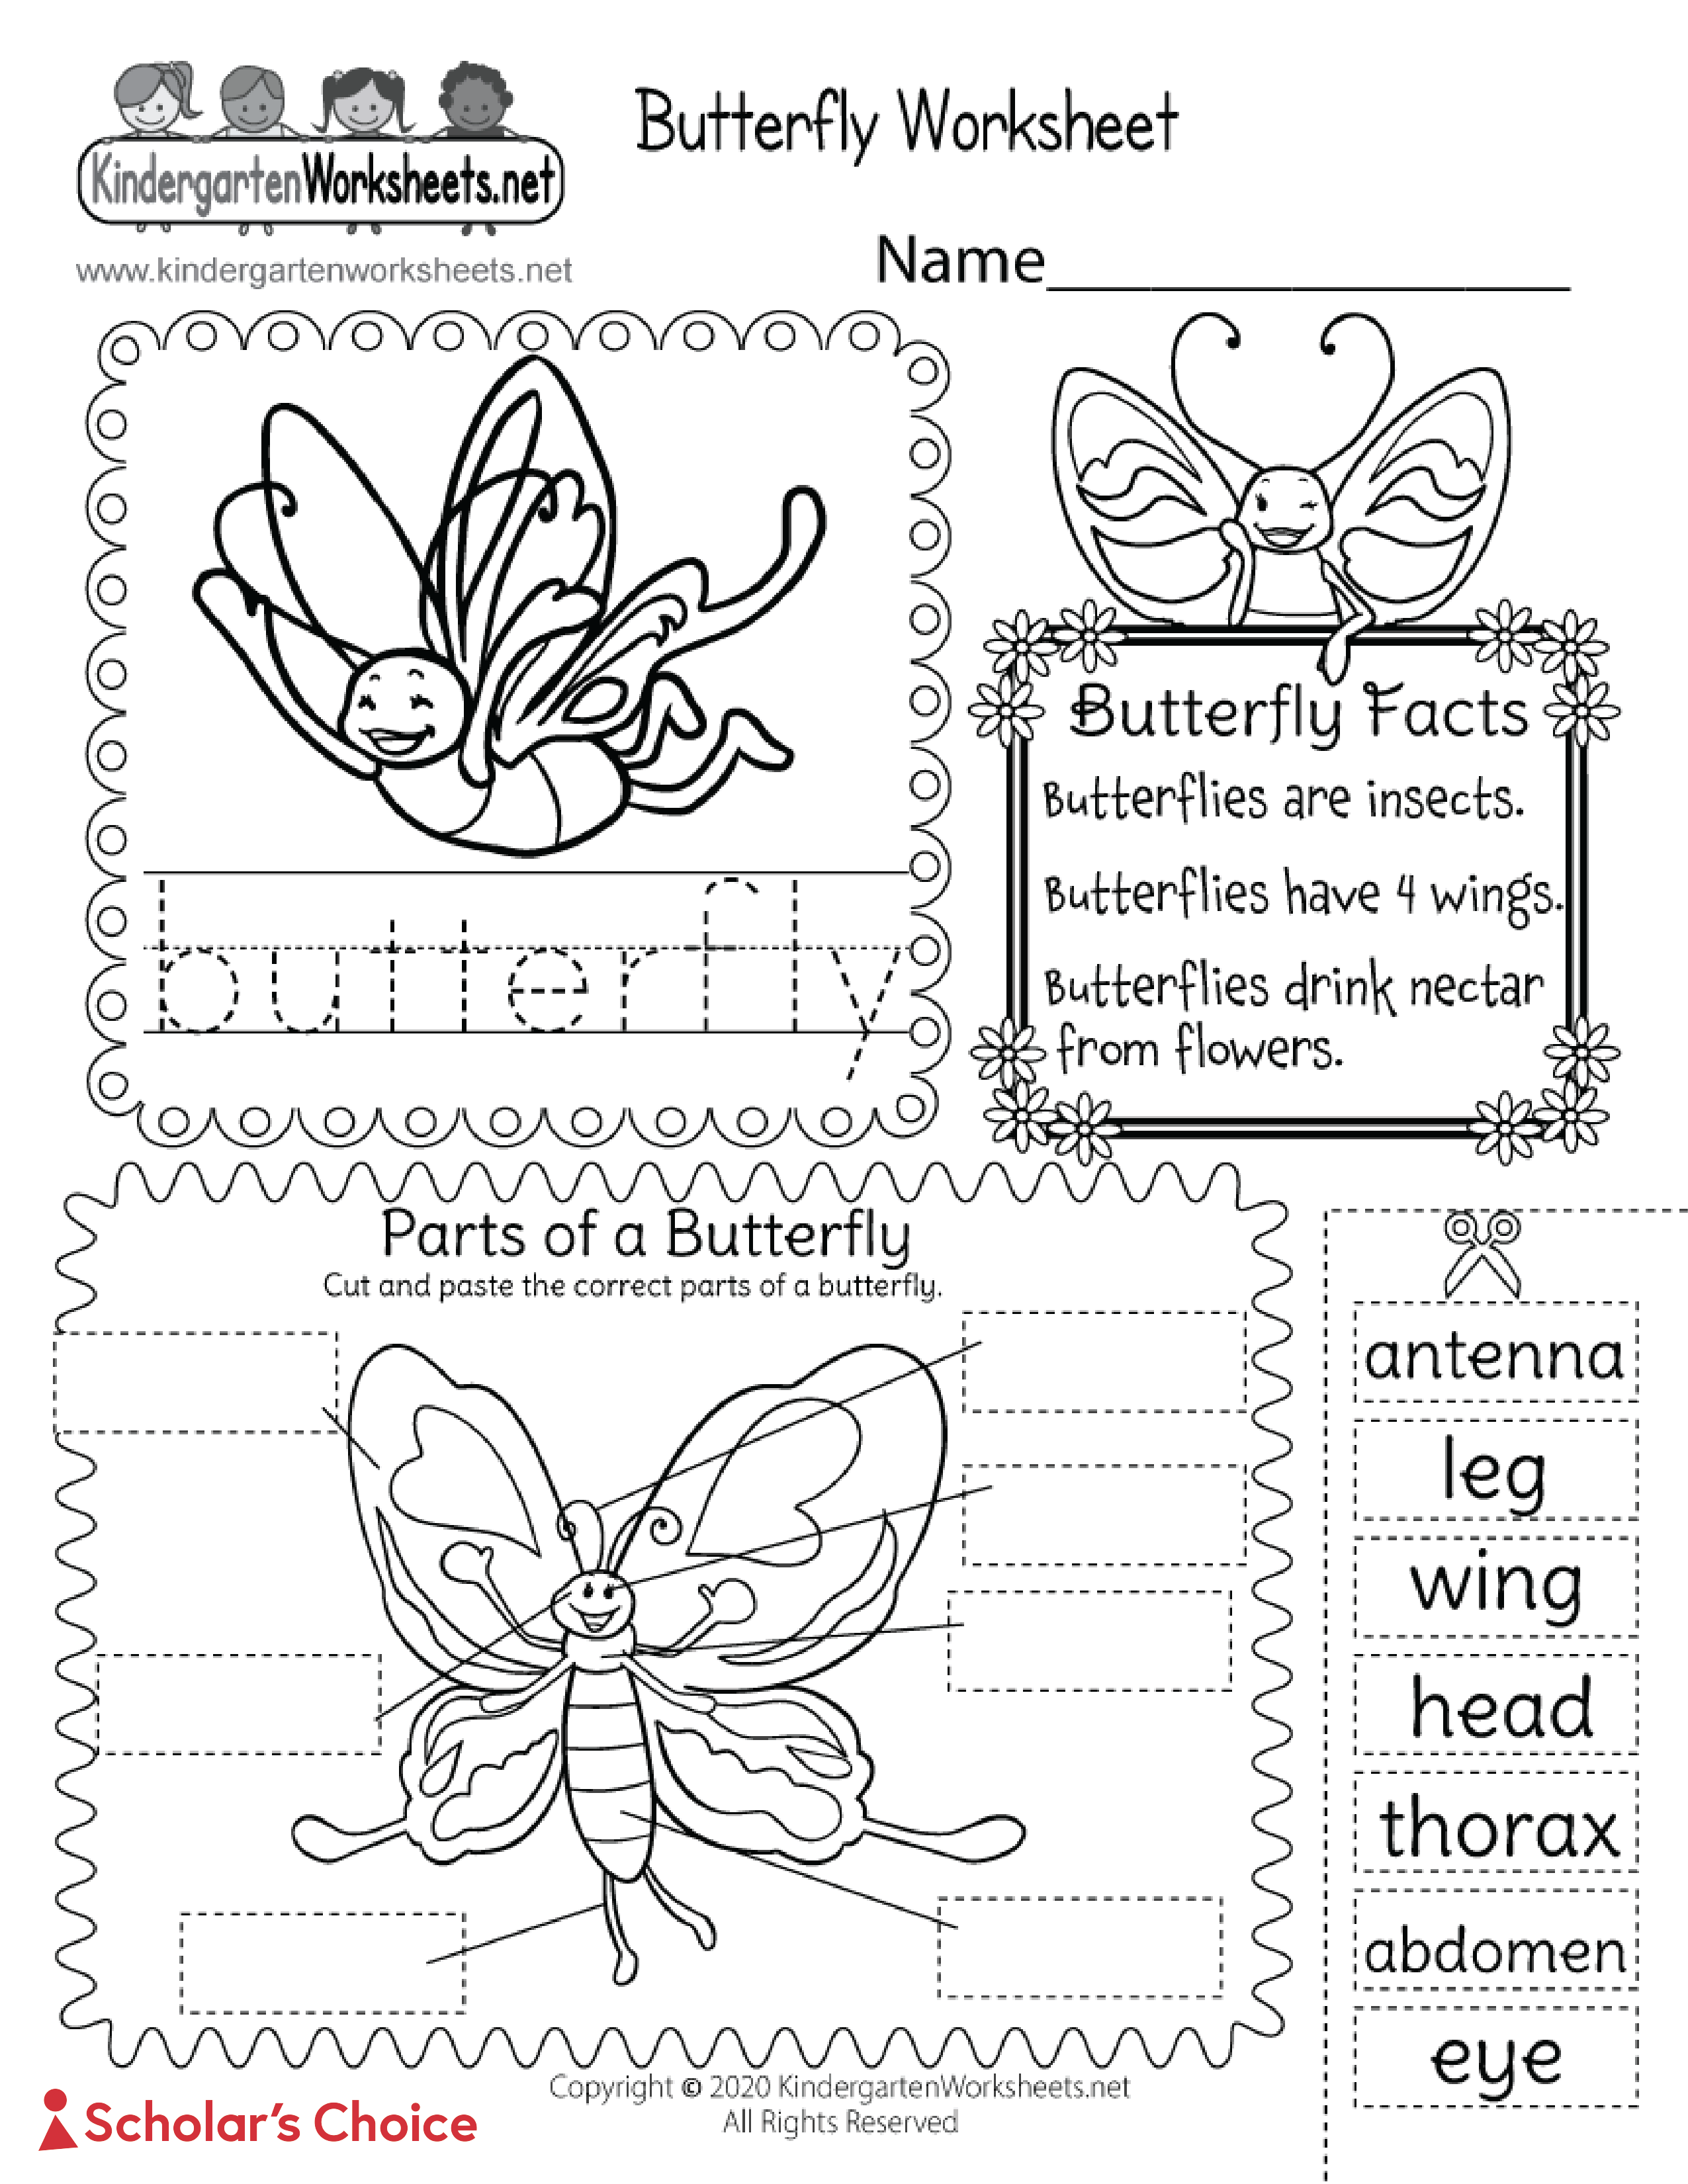 butterfly-activities-10